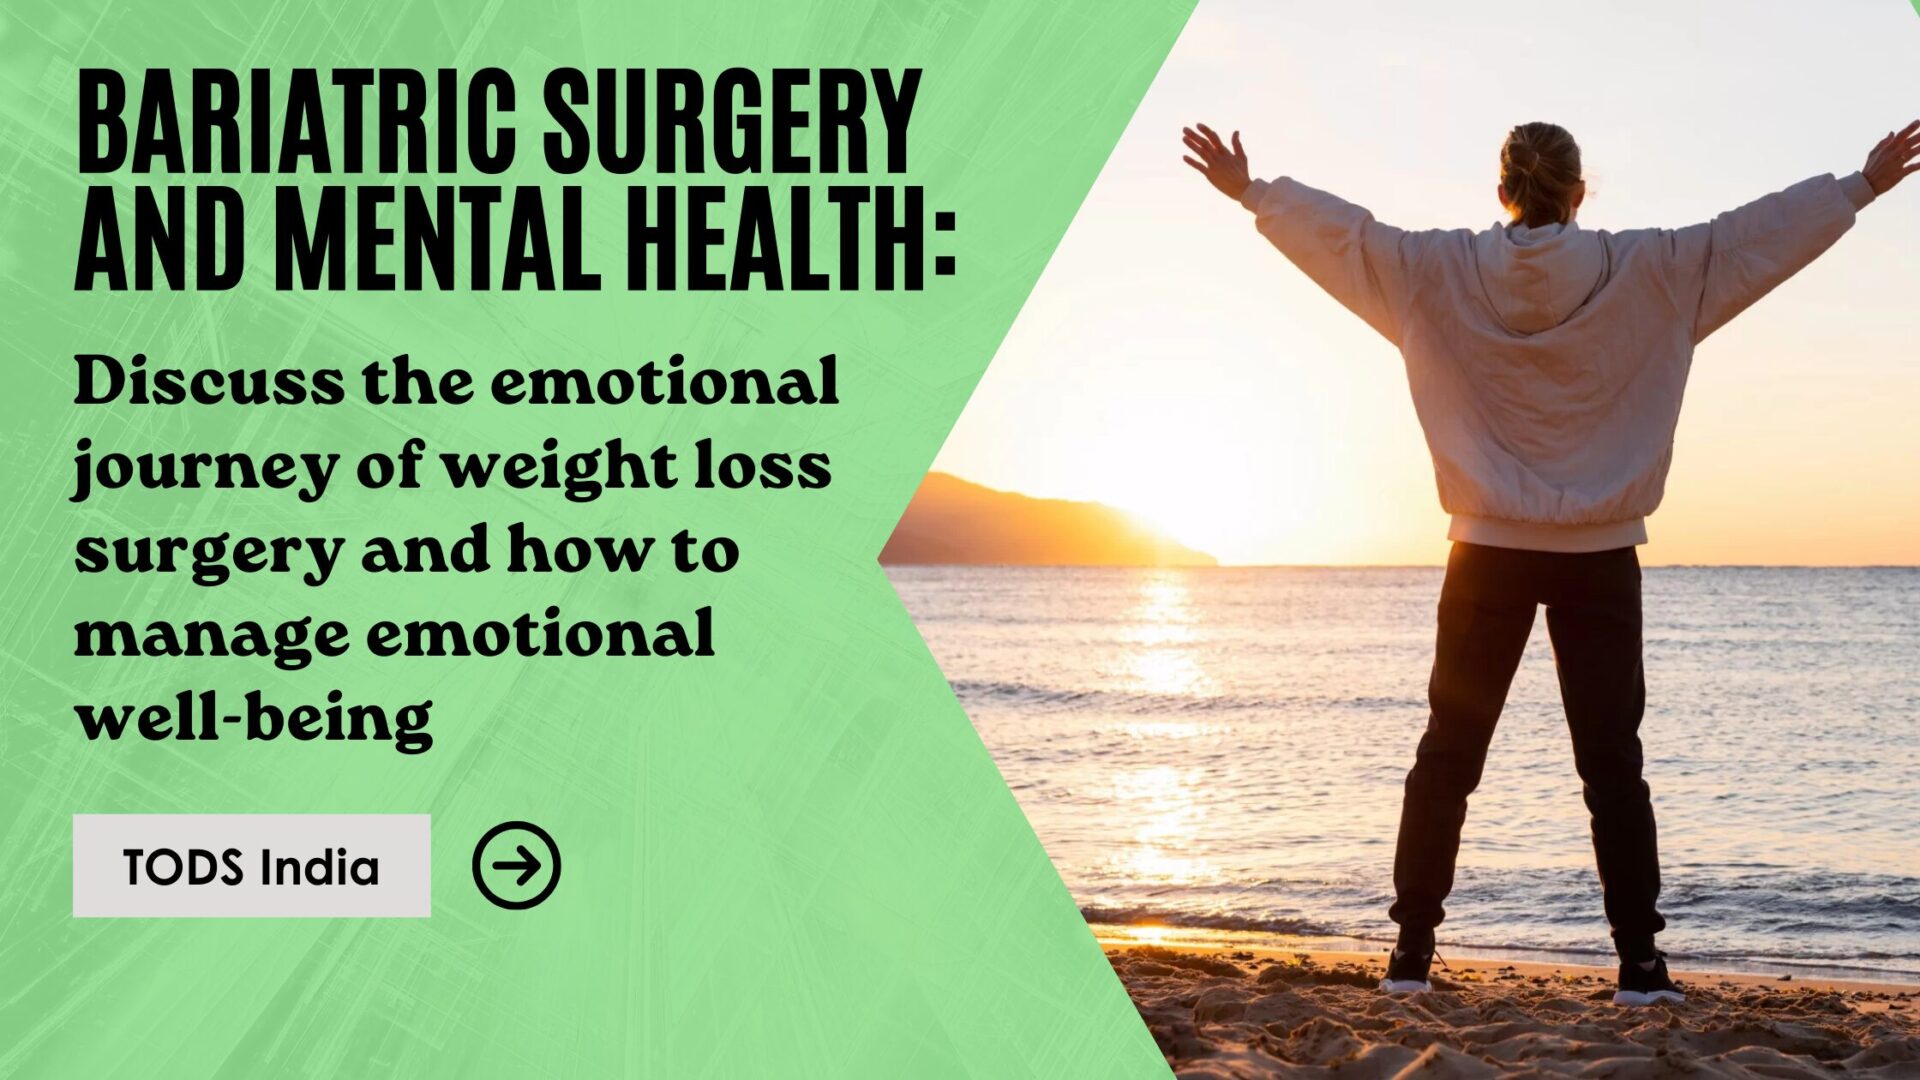 Bariatric Surgery and Mental Health: Bariatric Surgery and Mental Health: Discuss the emotional journey of weight loss surgery and how to manage emotional well-being.